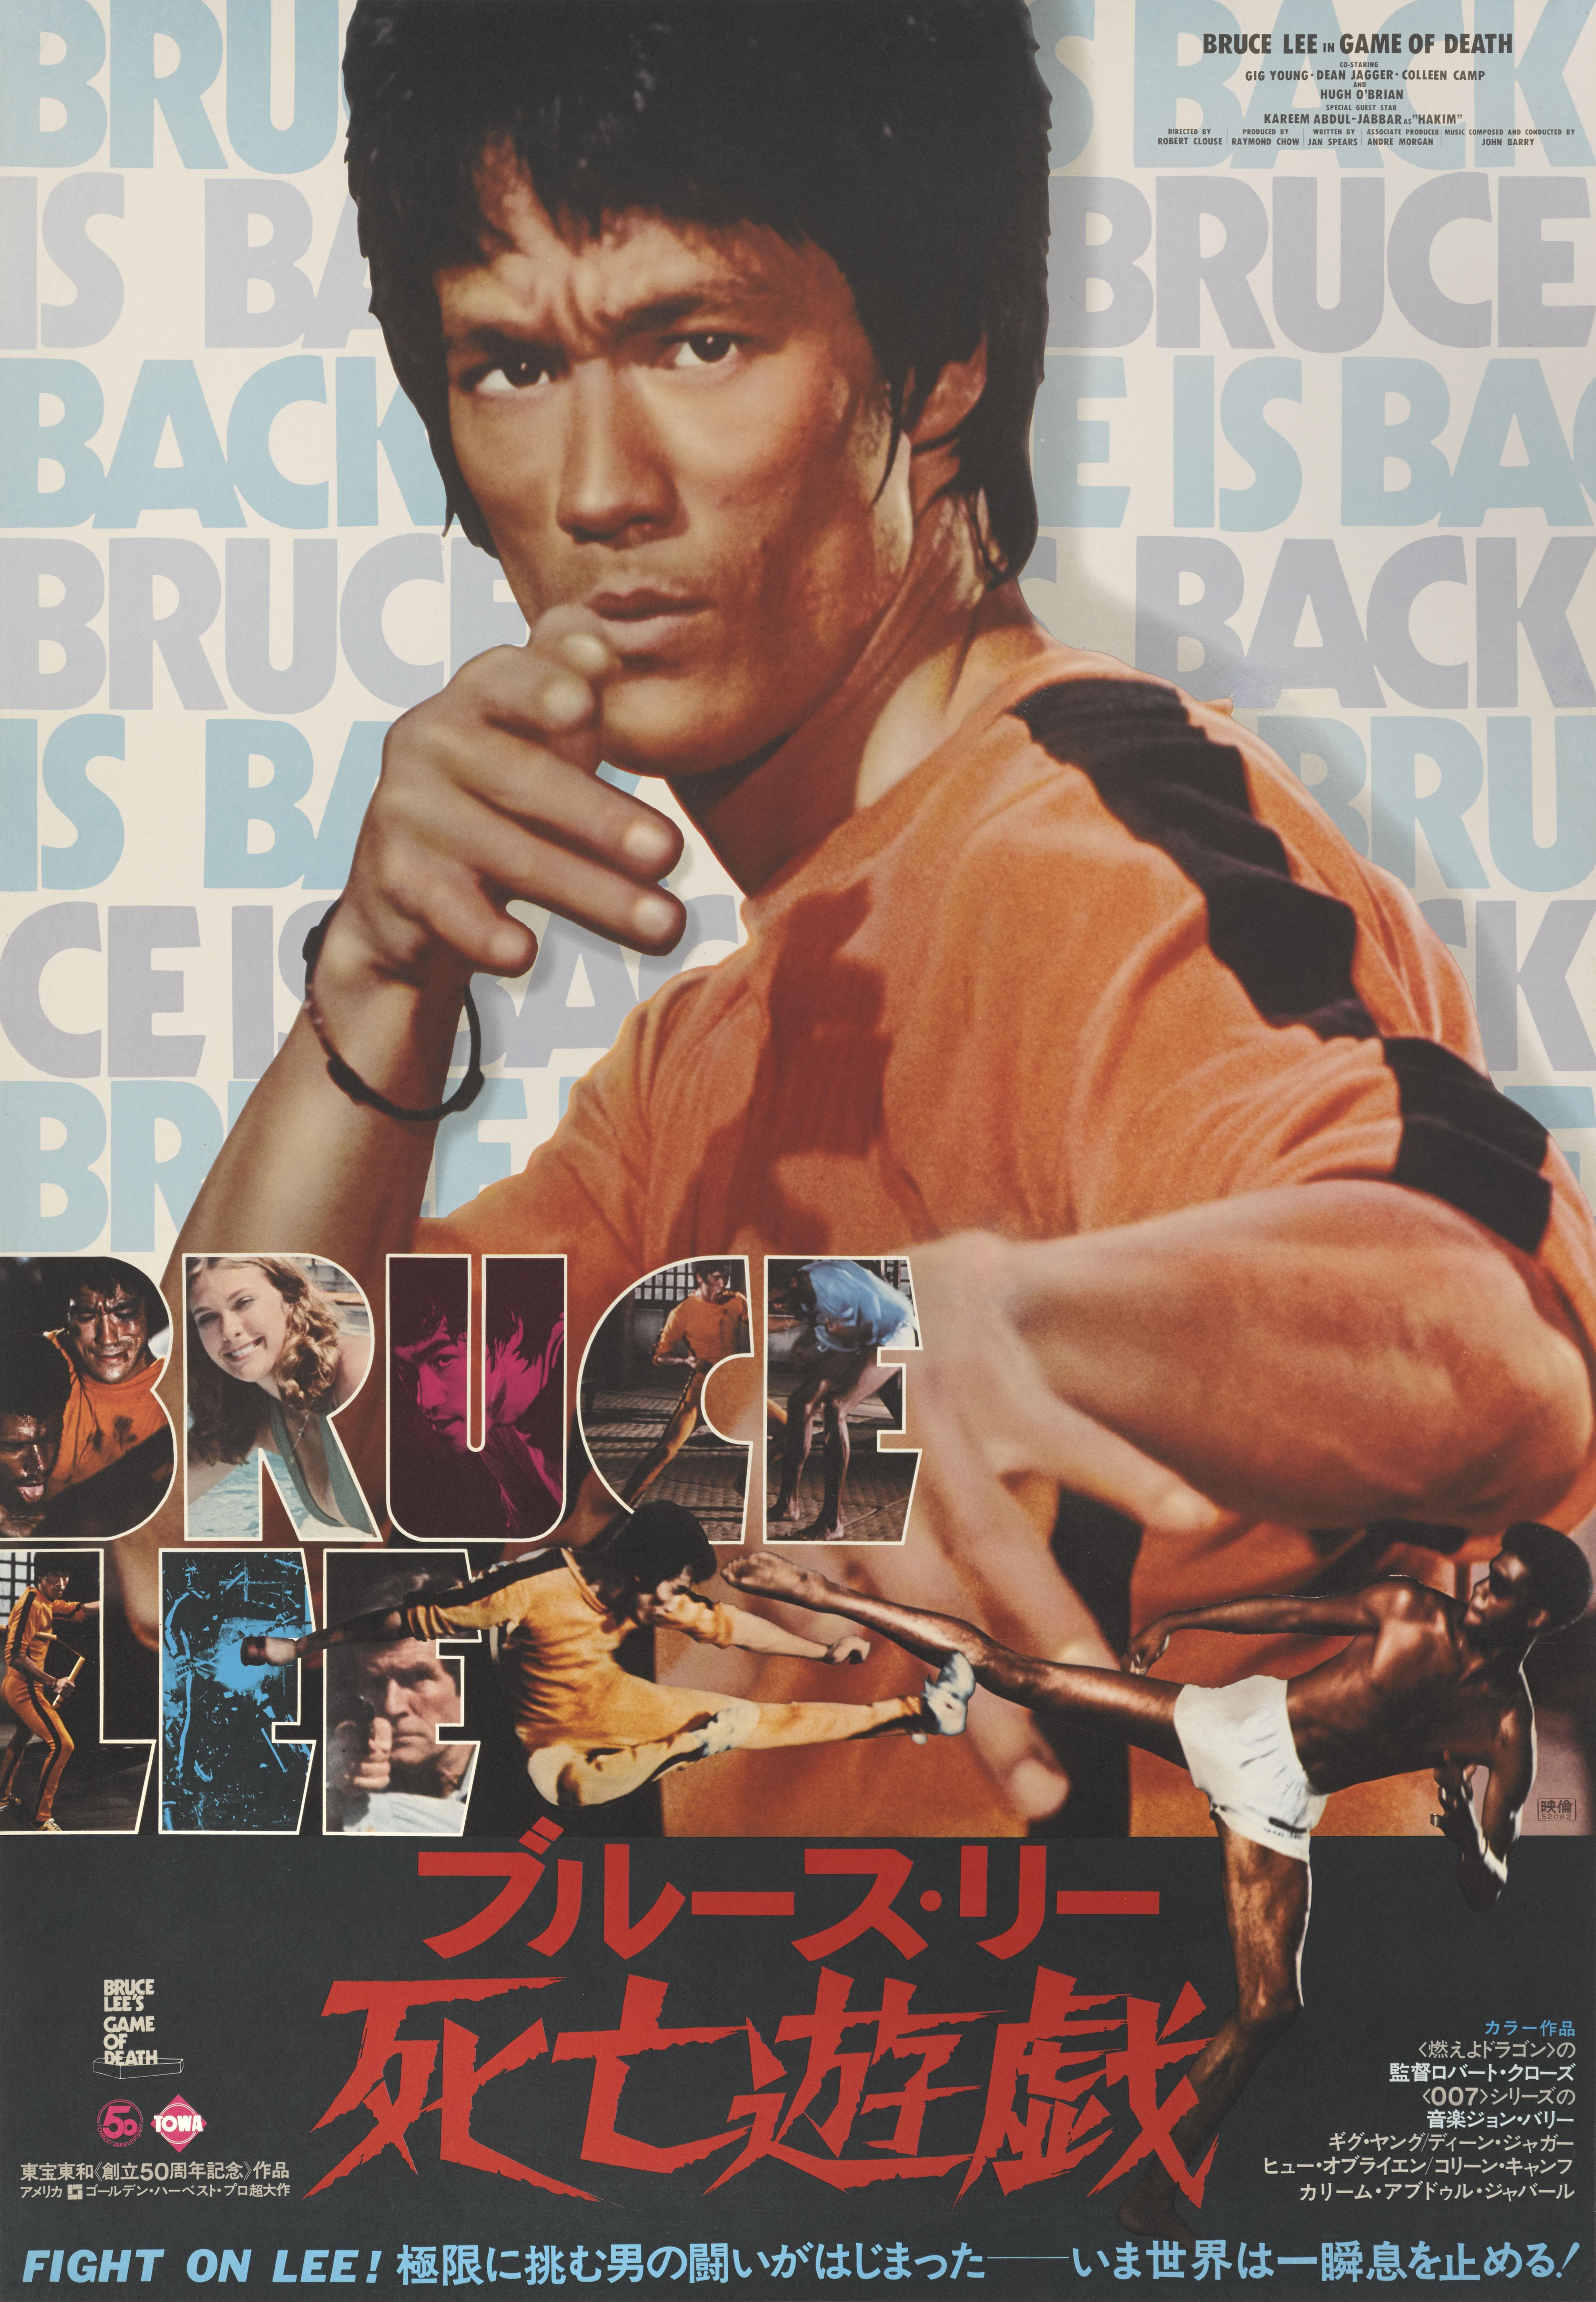 Original Film poster for Bruce Lee's 1978 film The Game of Death, directed by Bruce Lee and Robert Clouse.
This poster is linen backed and unfolded and in in excellent condition, with the colour remaining very bright.
The poster would be shipped